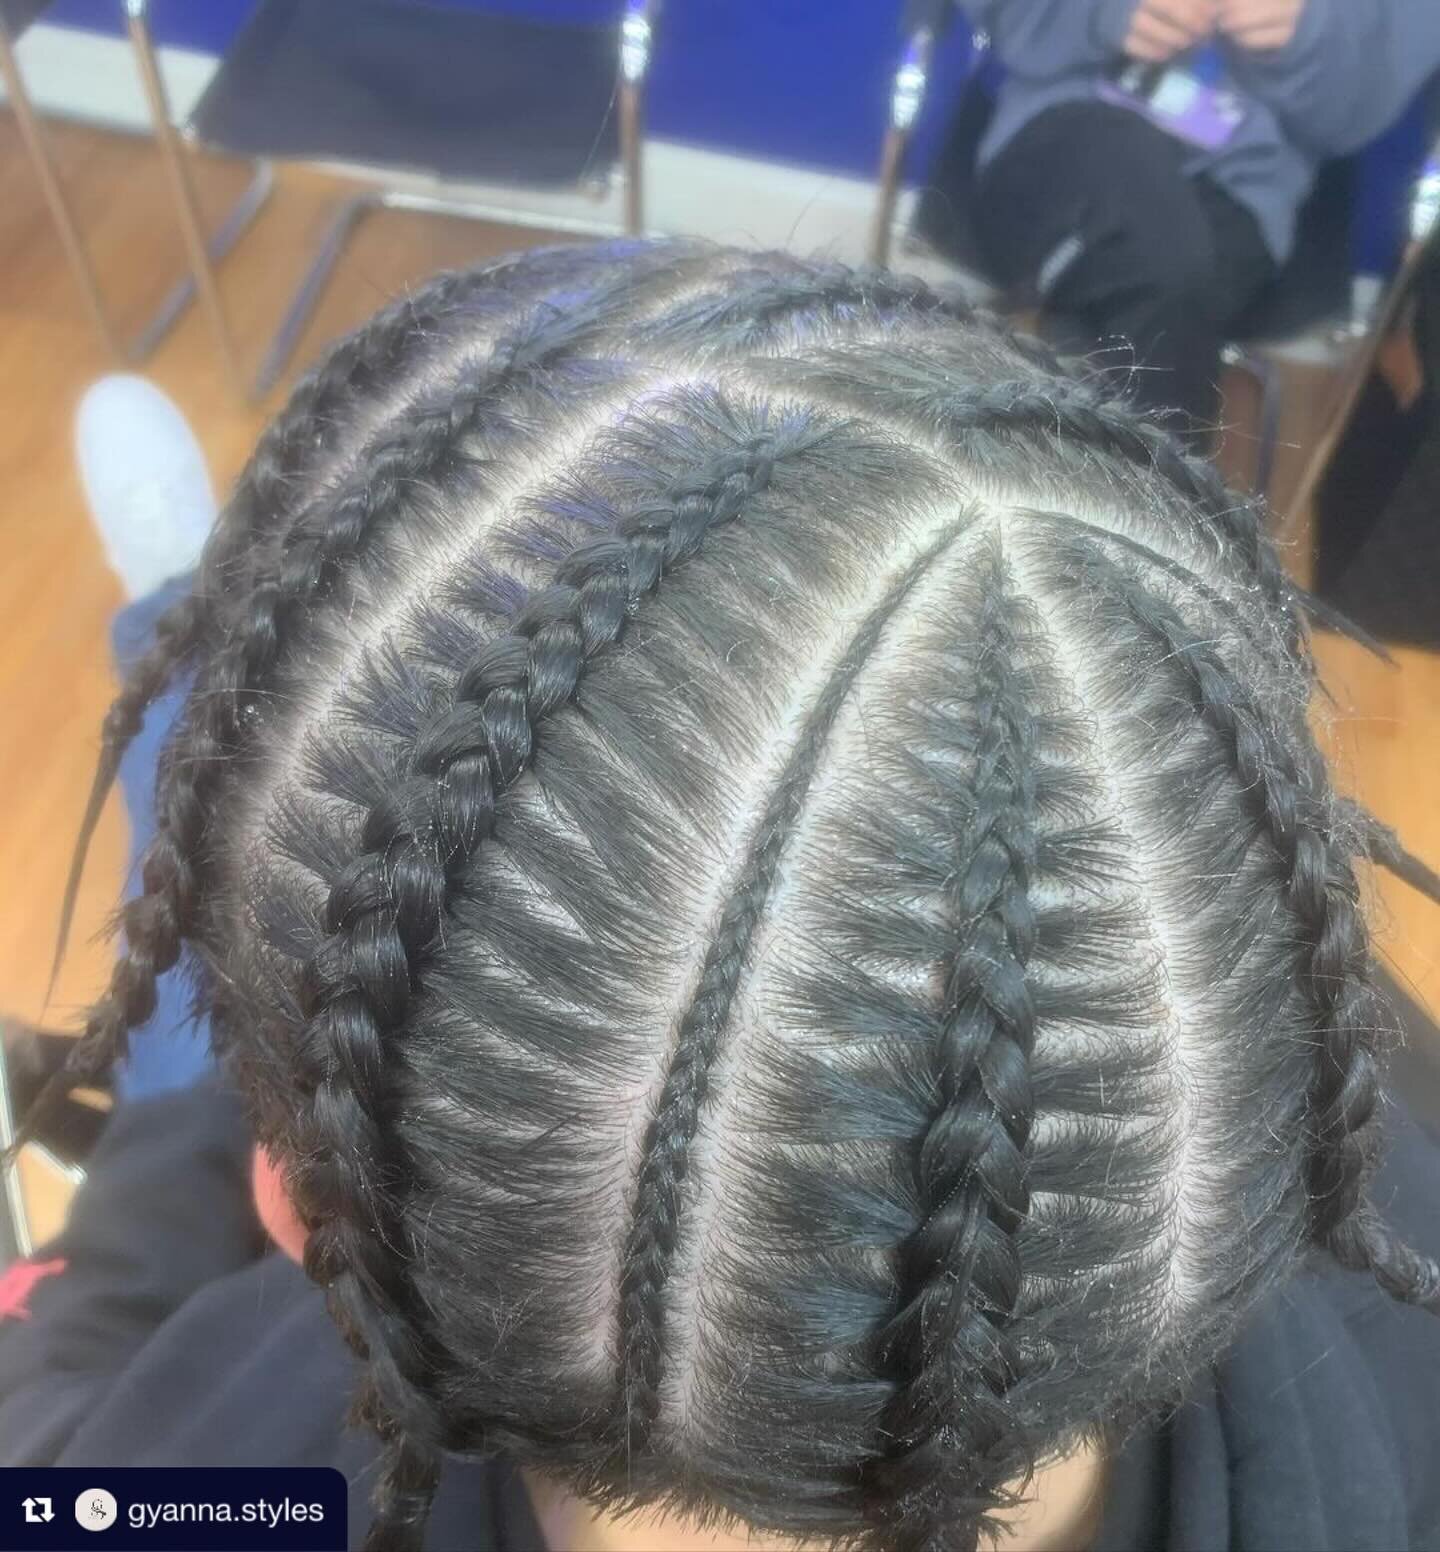 Repost from @gyanna.styles
&bull;
I love cornrows😭 i love it even more when its a freestlyle🙃 plus a fresh cut by @401antblendz &hellip; dont even get me starteddd👏🏼👏🏼 These came out soo nicee😫

Come visit me at blendz barbershop😁💈

ngl tho 